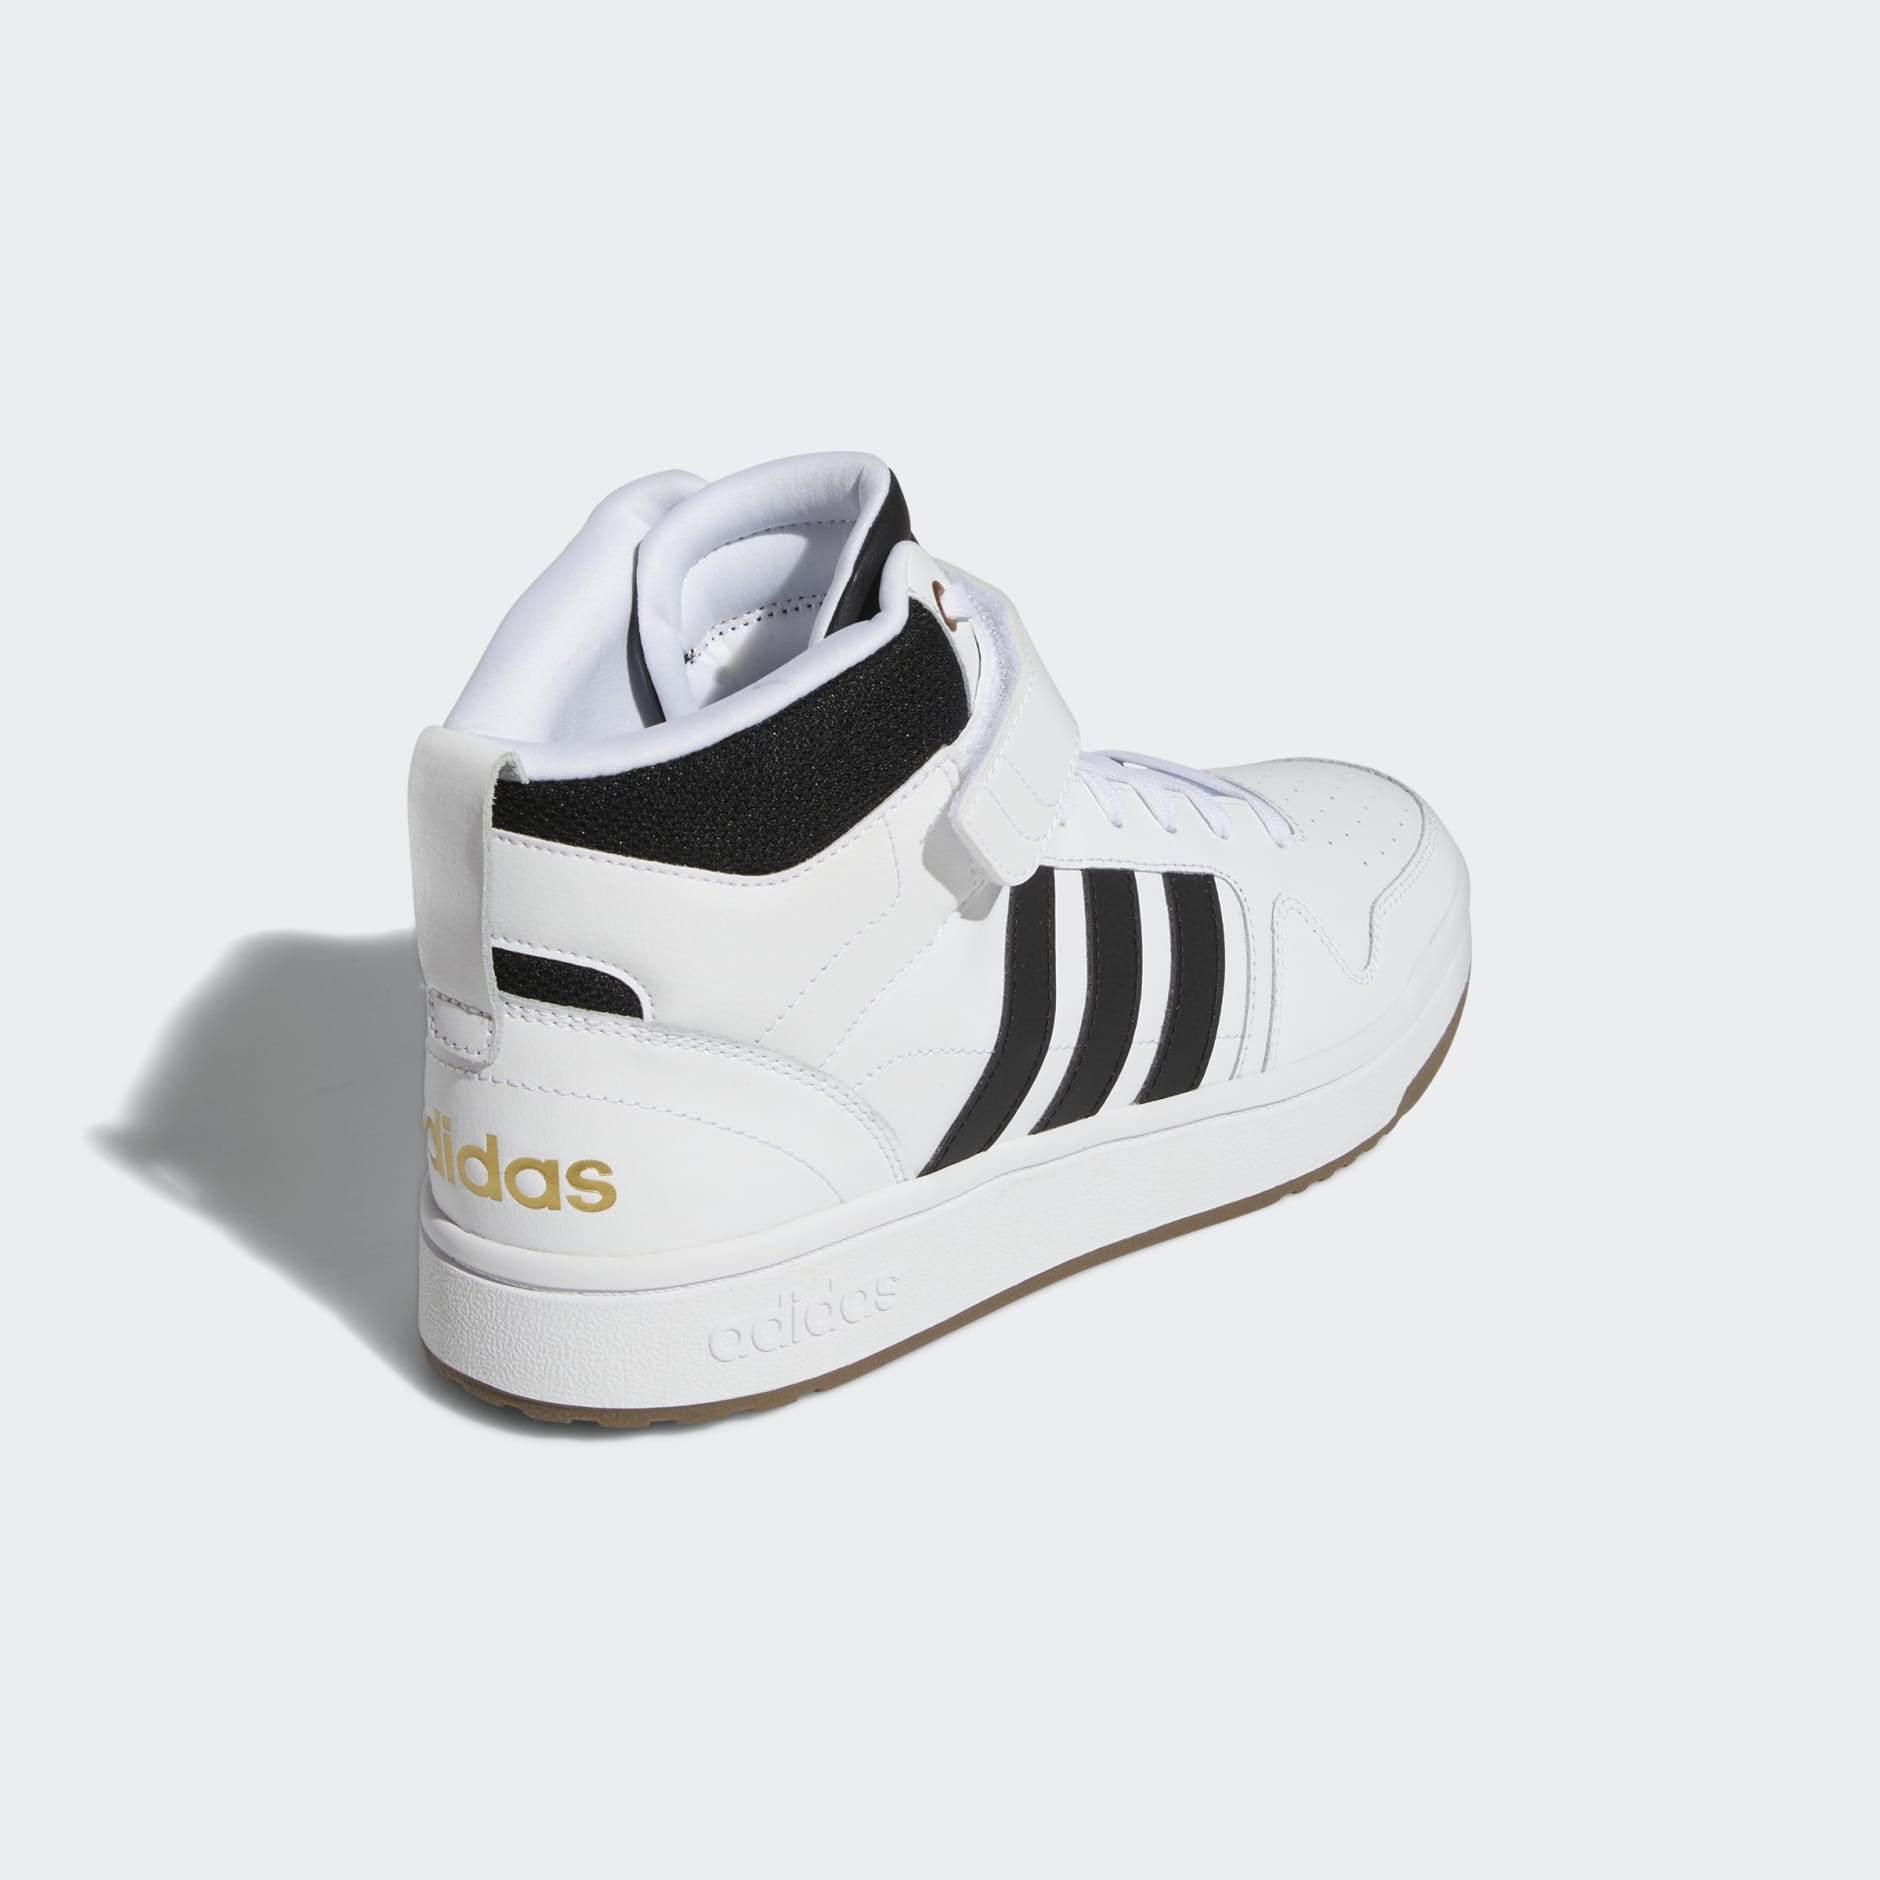 Shoes - Postmove Mid Shoes - White | adidas South Africa